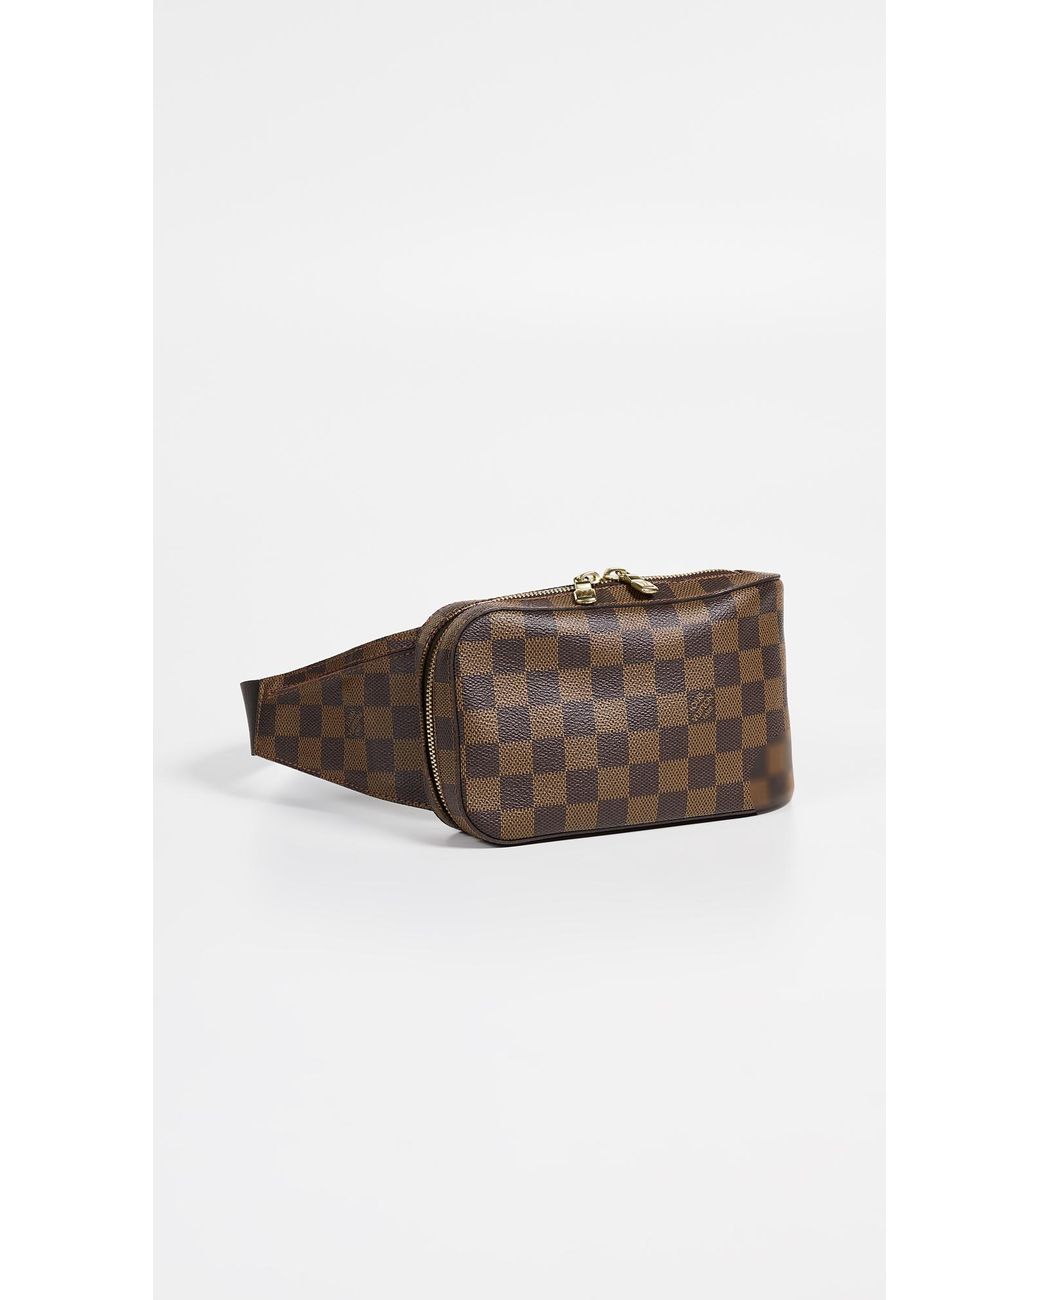 What Goes Around Comes Around Louis Vuitton Damier Hobo Bag